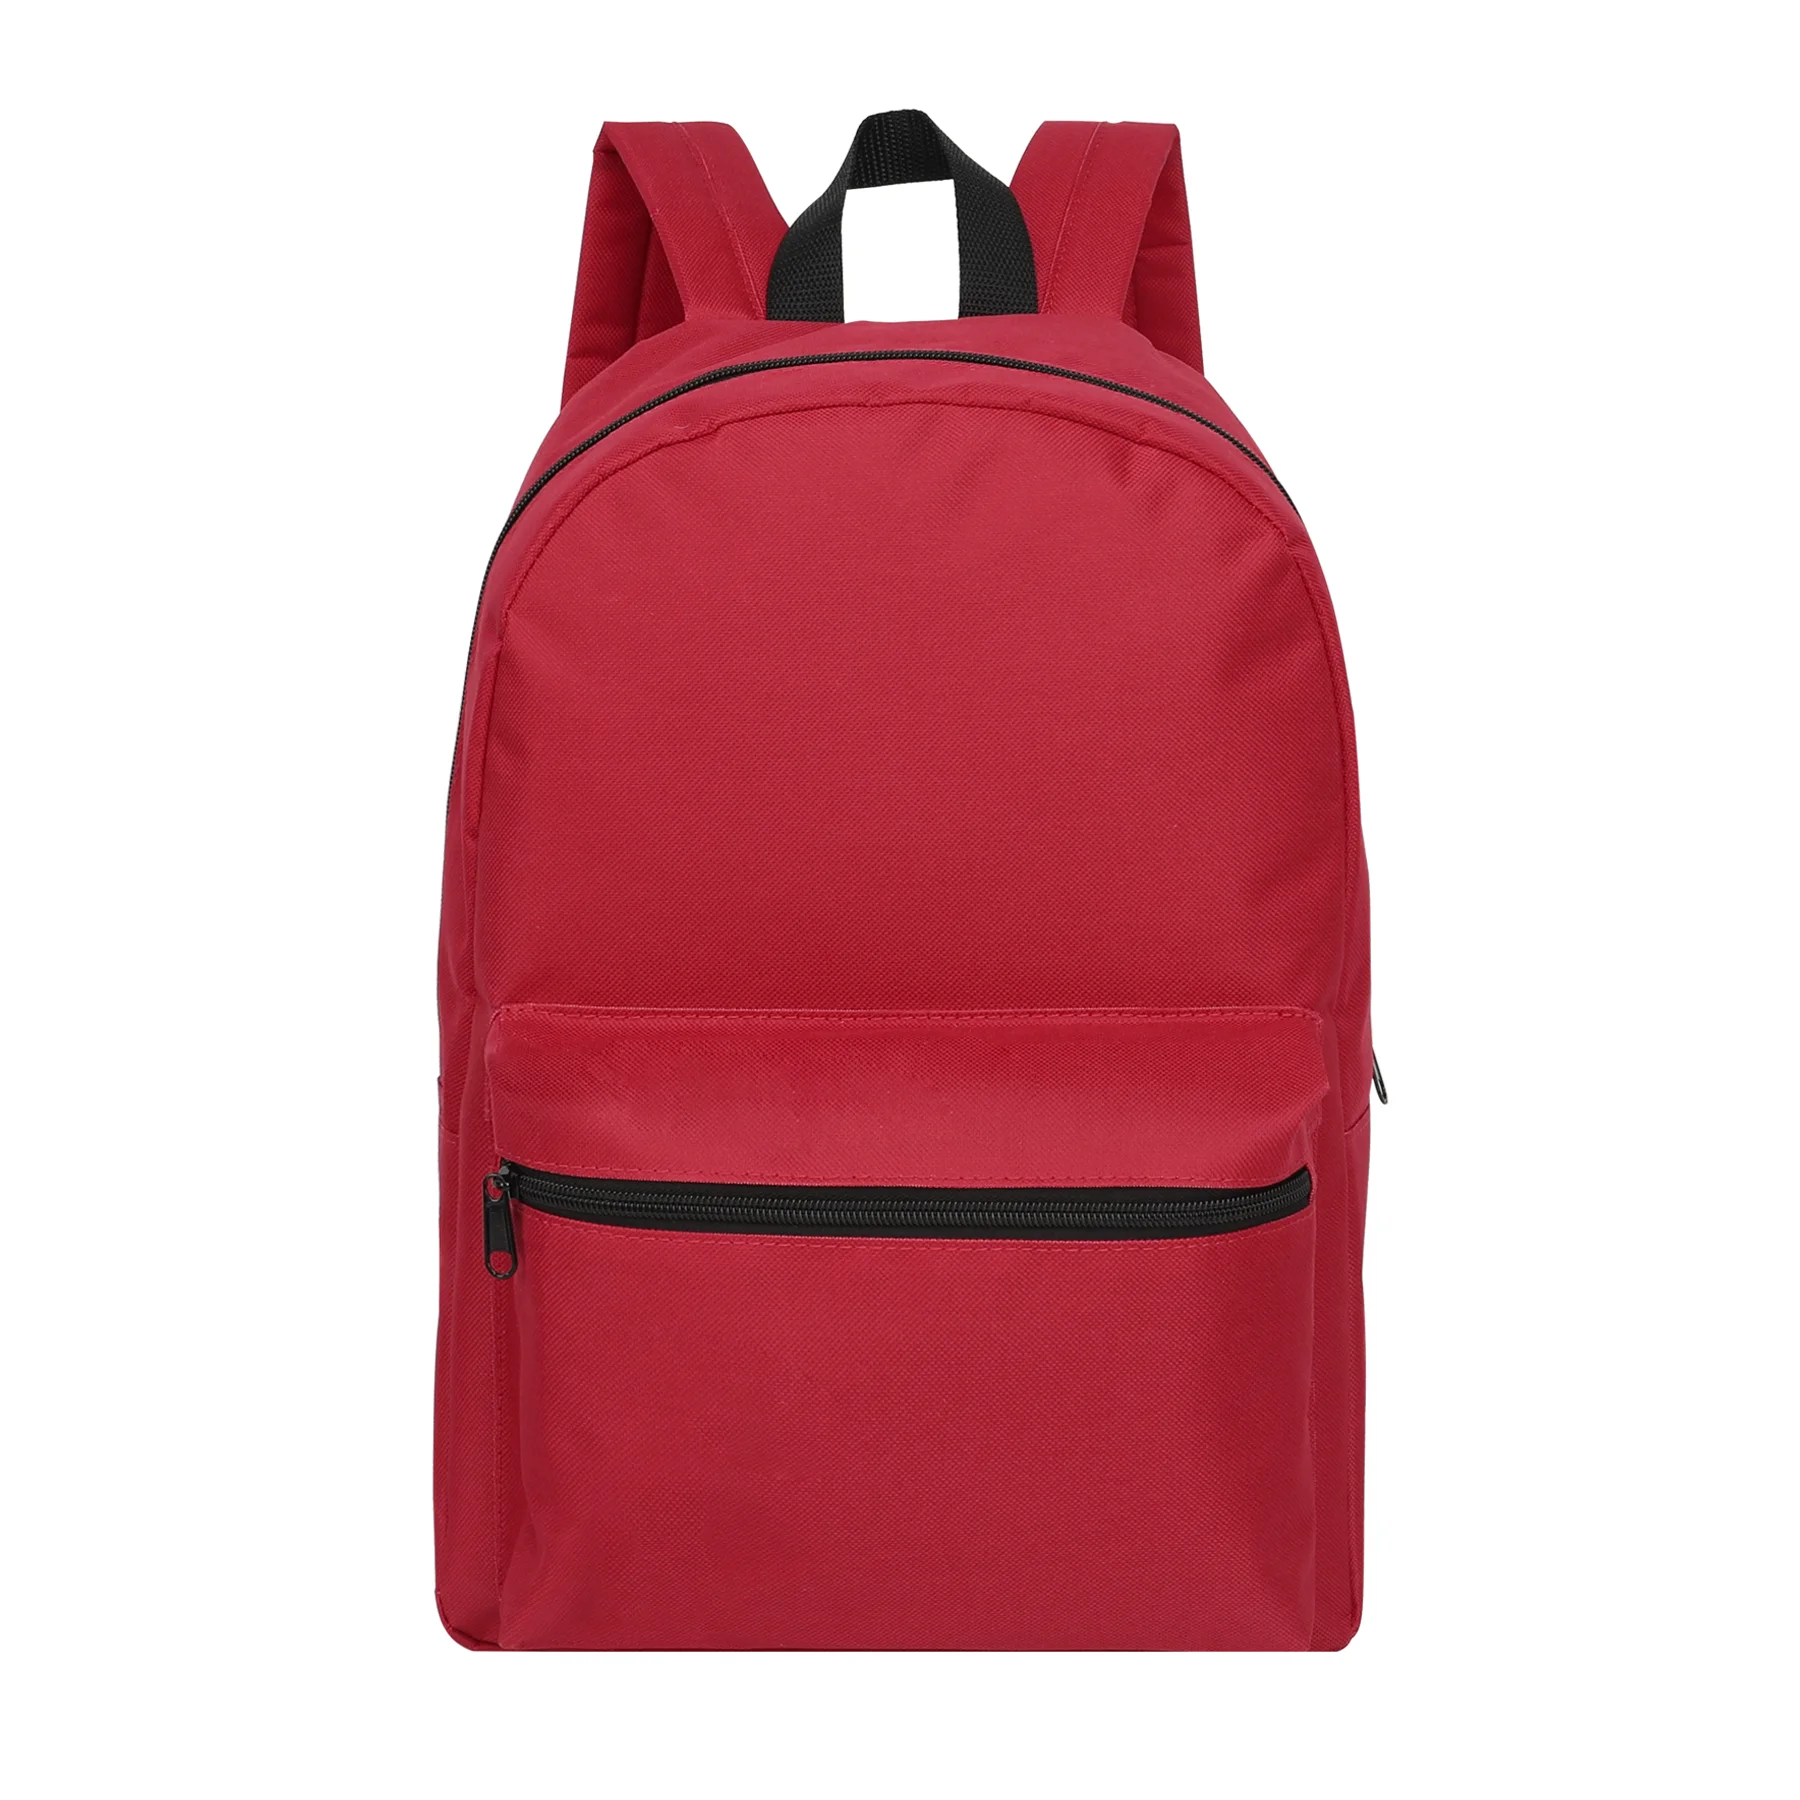 

Wholesale cheap primary college school bags kids children student bagpack school bag backpack for girls teenagers, Red,navy,black